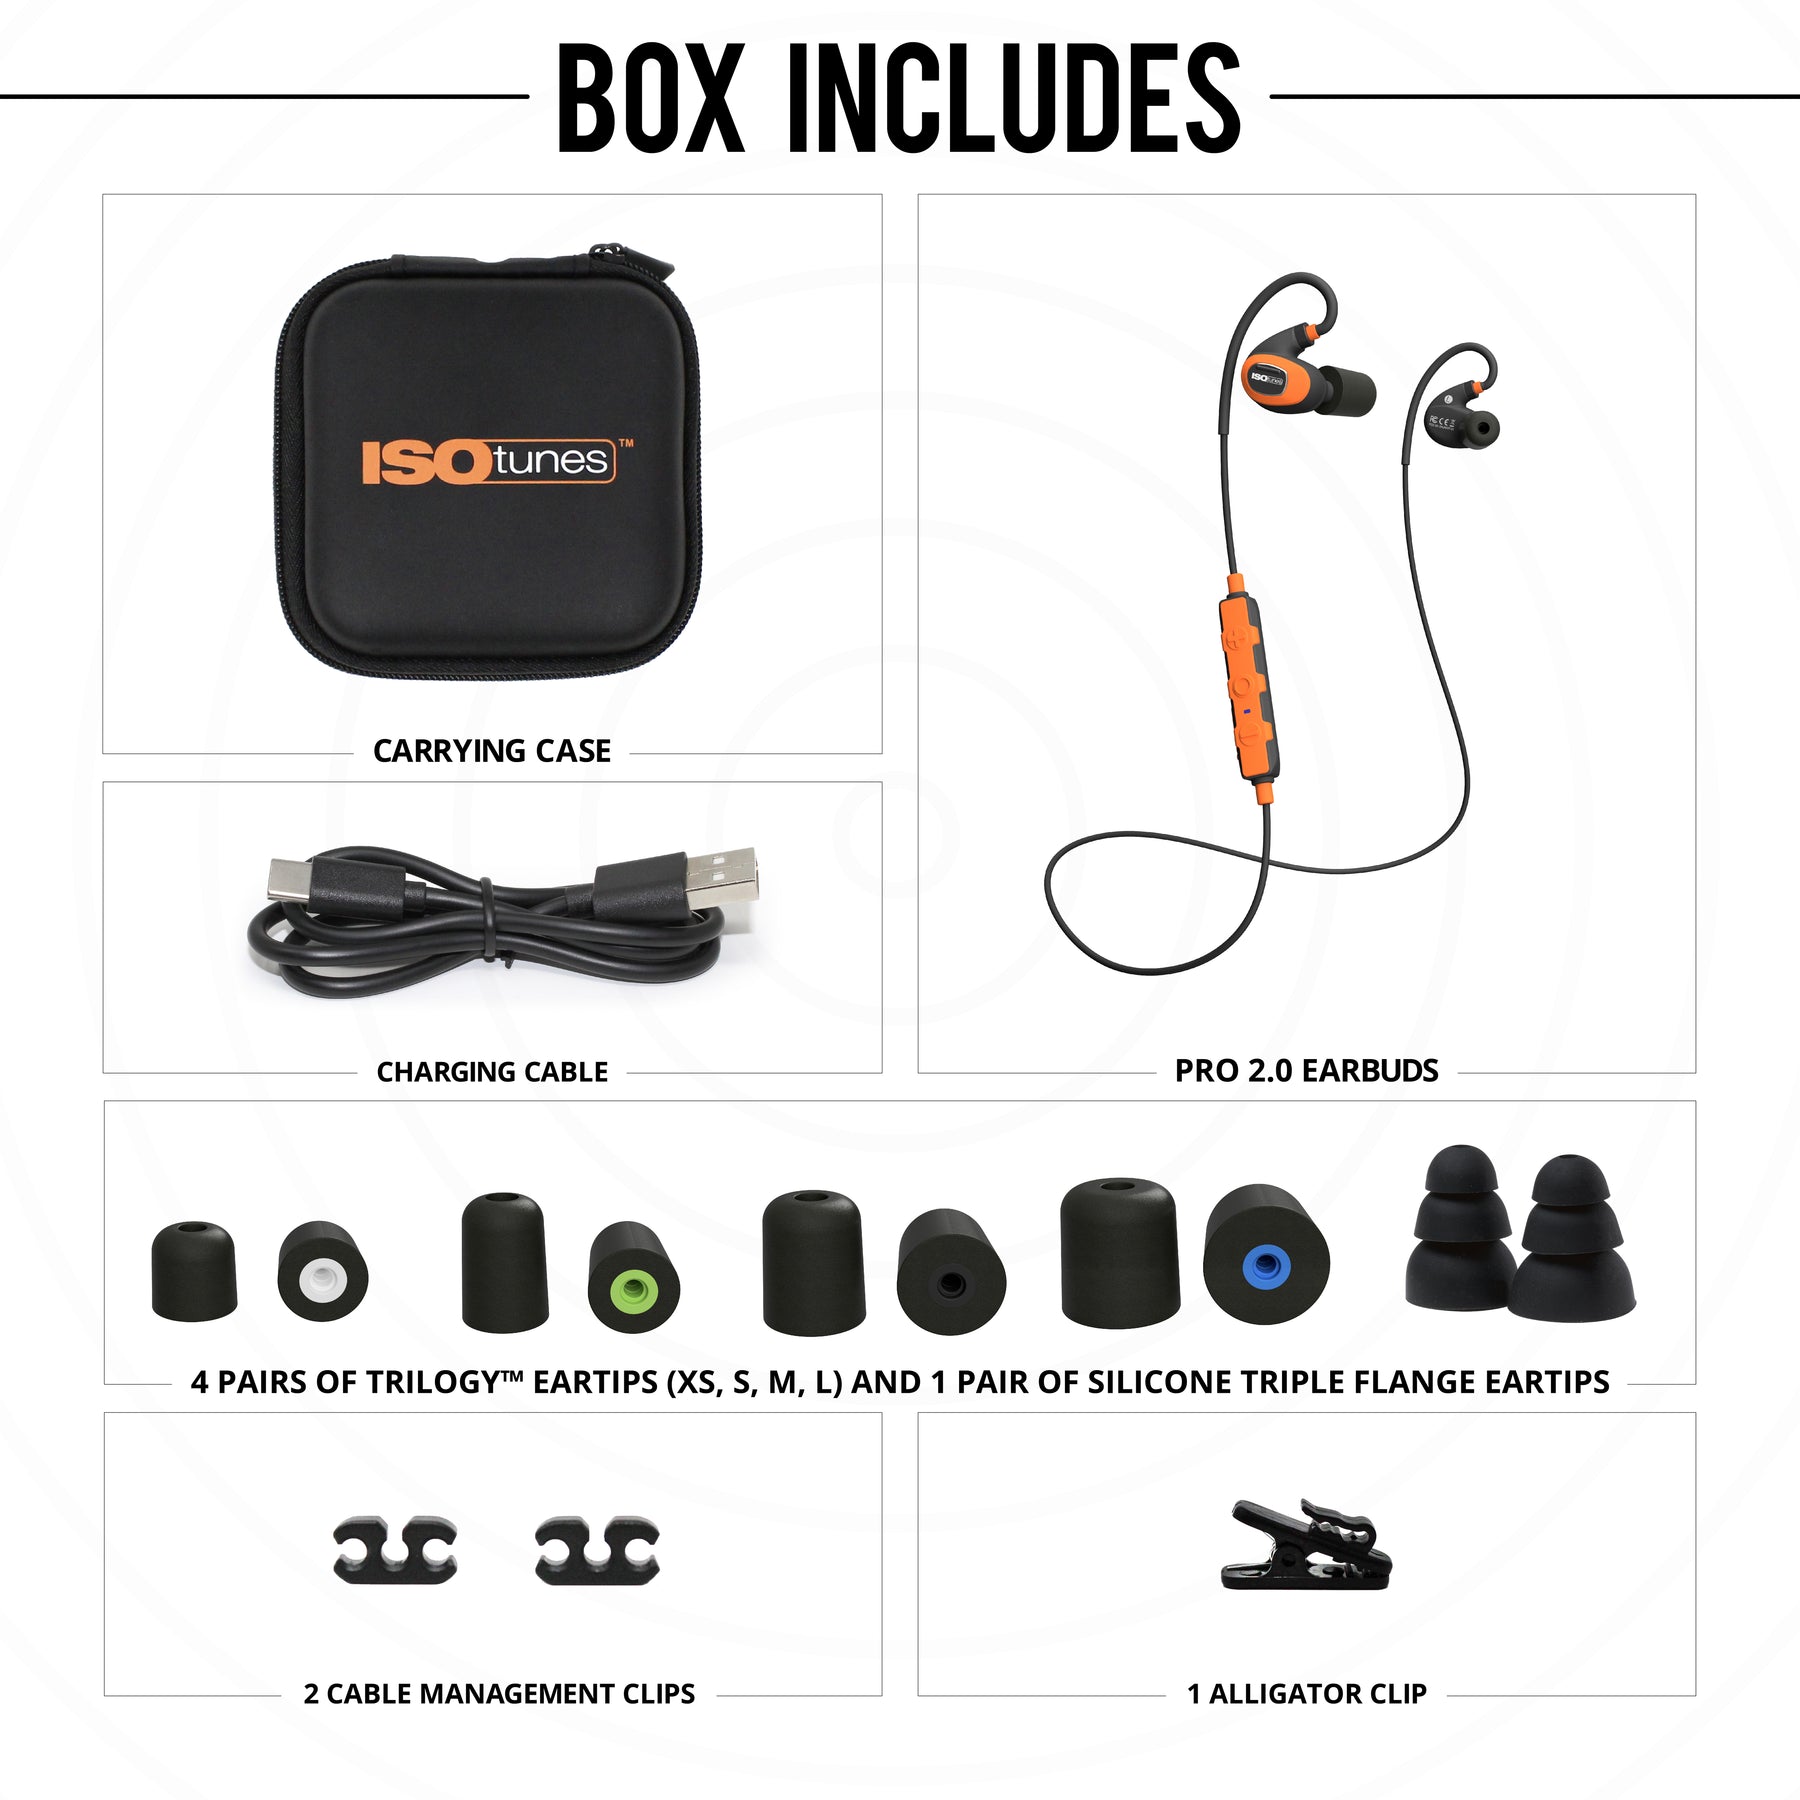 ISOtunes PRO 2 Hearing Protection Earbuds with Bluetooth What's Inside